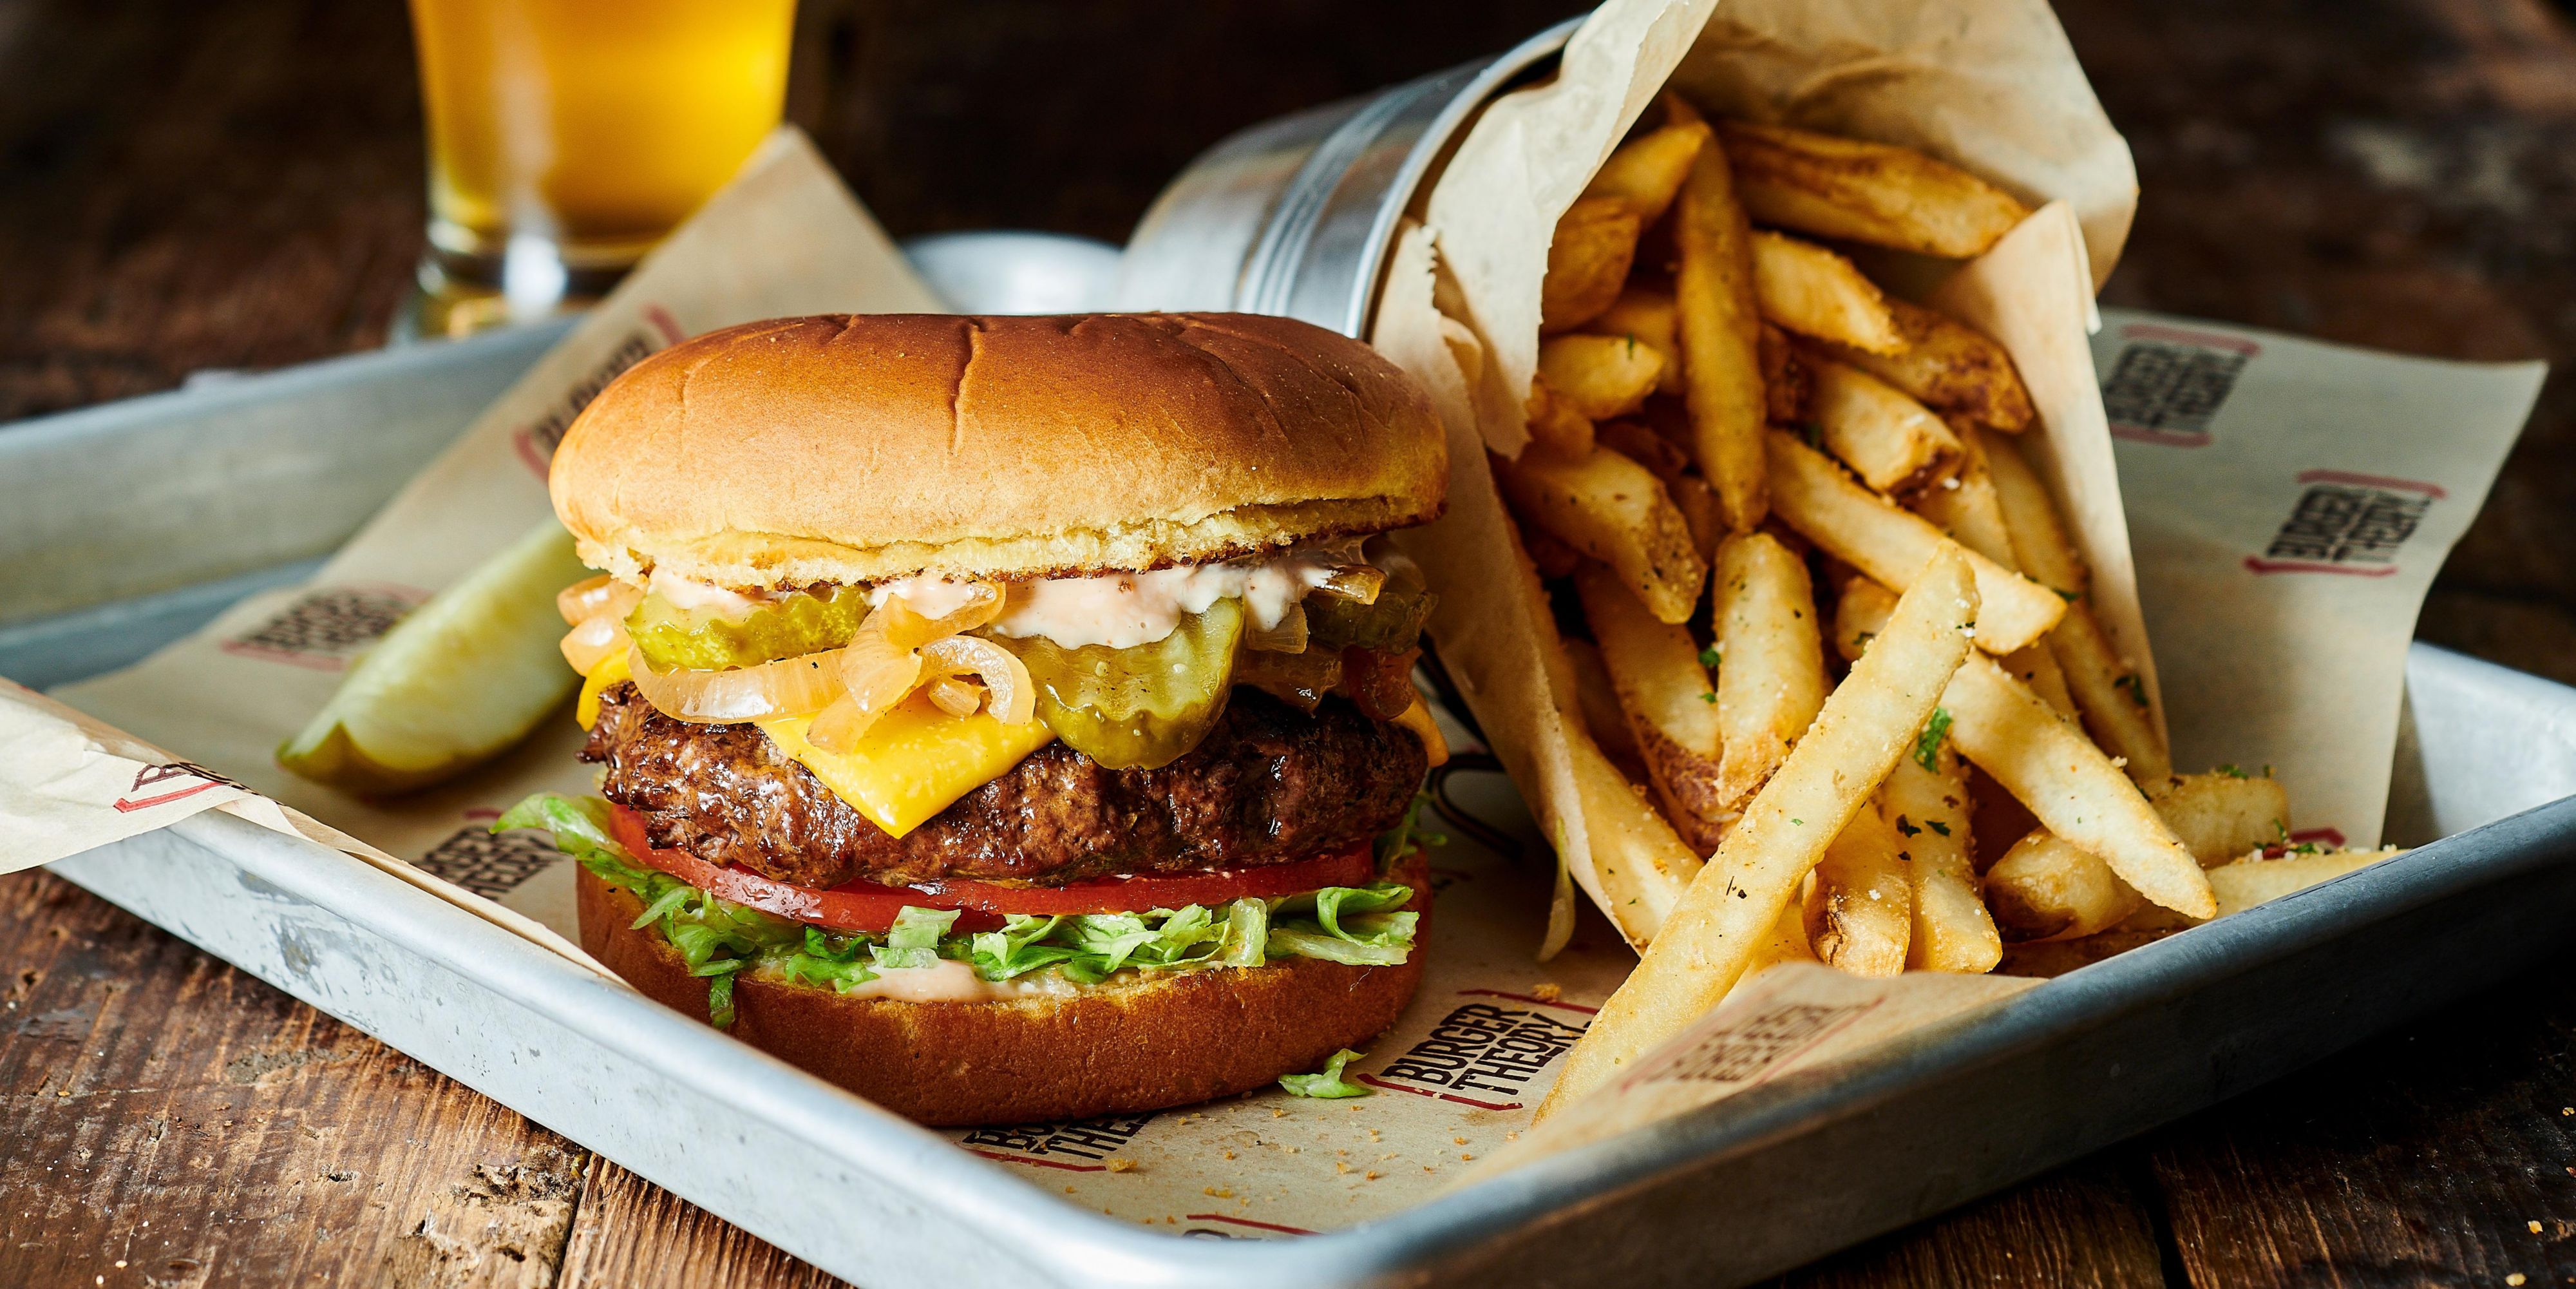 Burgers and beers, our top sellers at The 1750 Grille